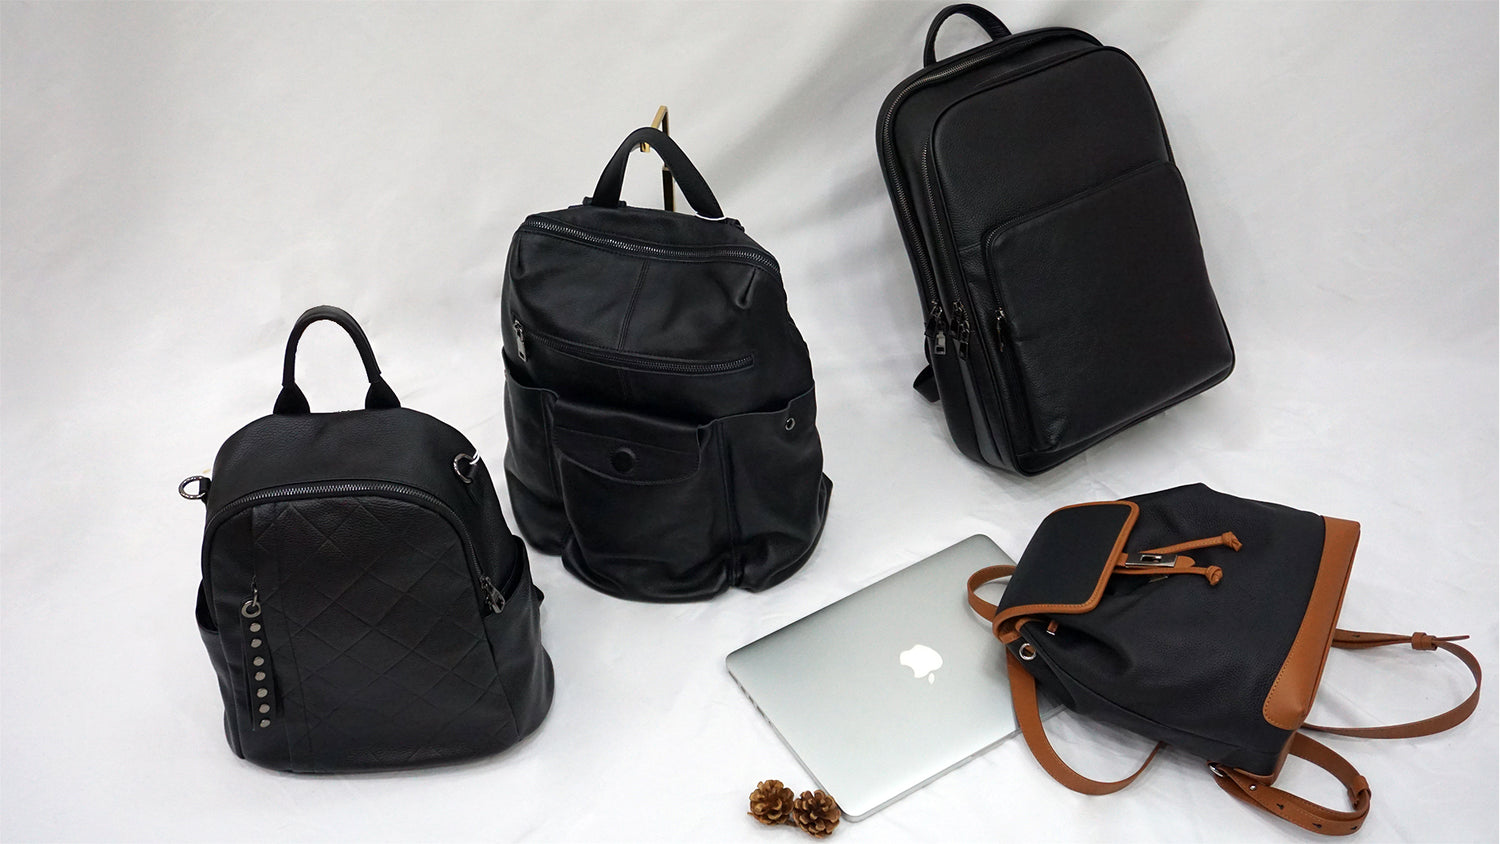 Women's leather backpacks by Tomorrow Closet (Singapore)